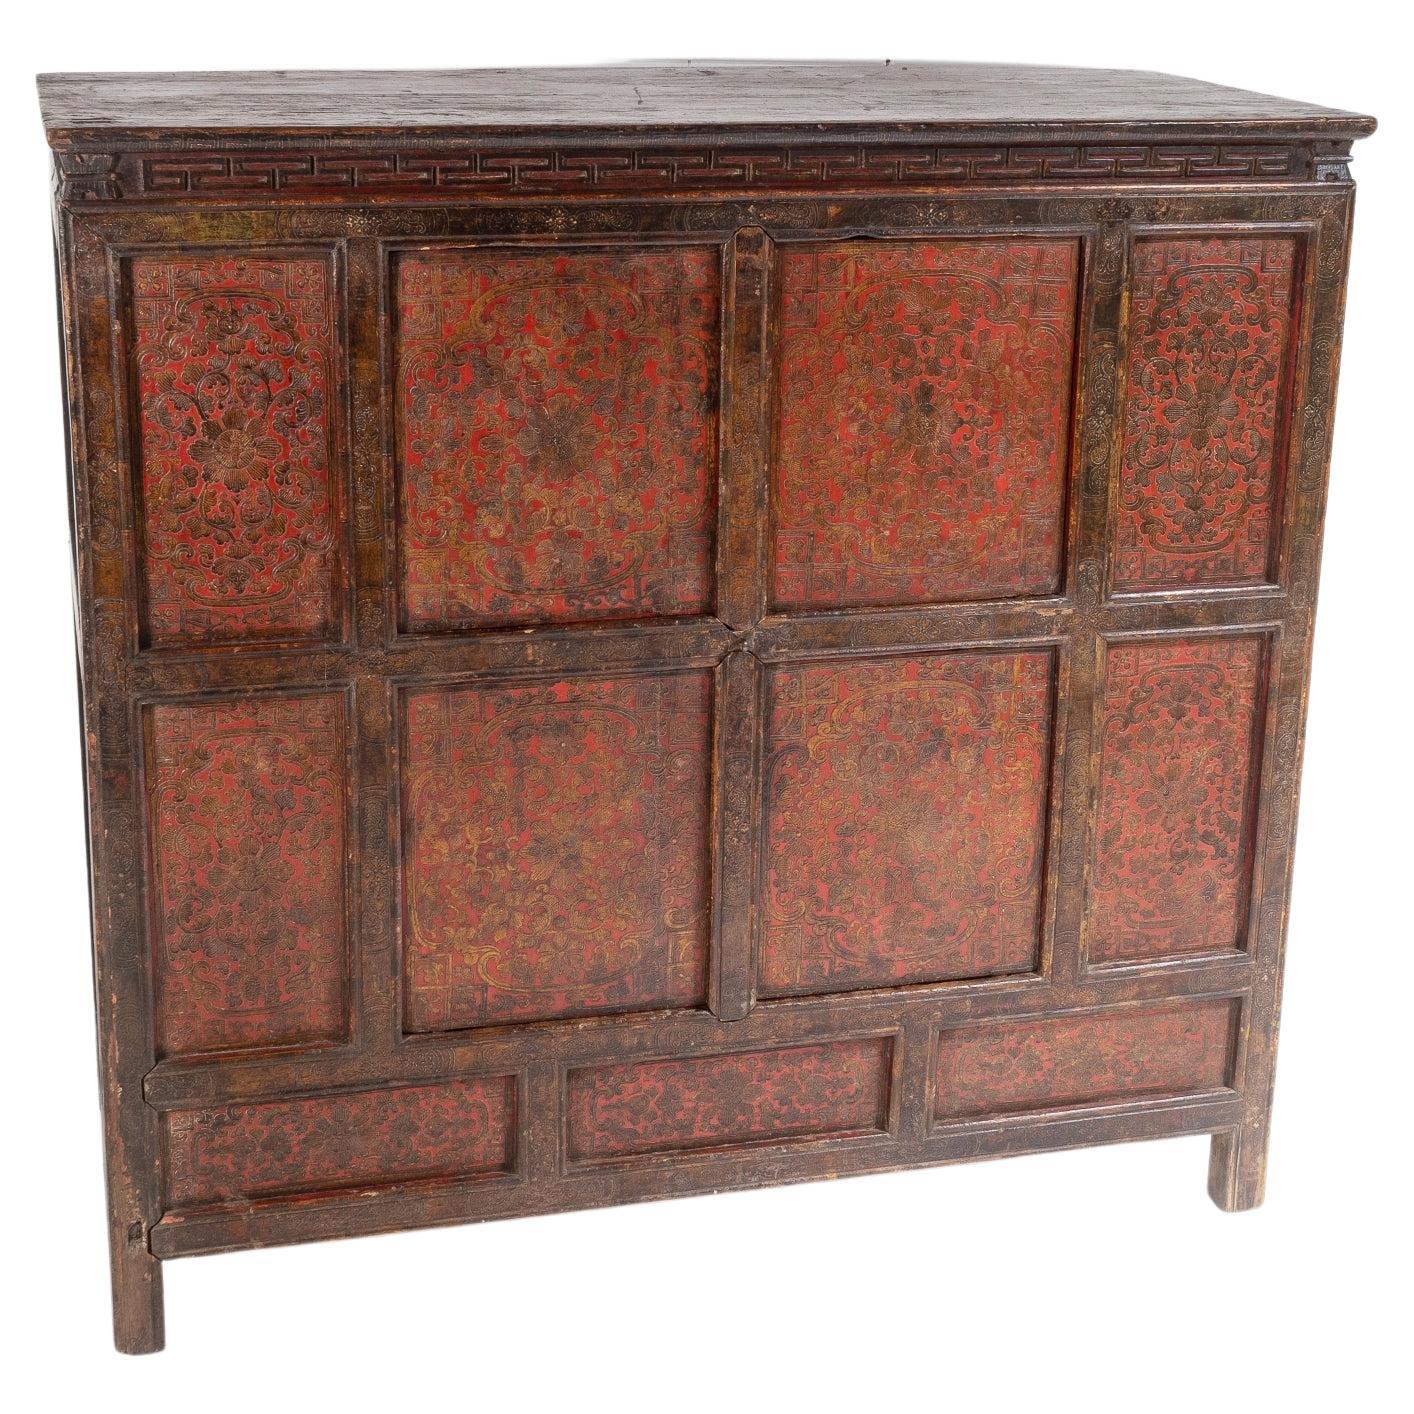 Original 19thC Large Chinese Tibetan Hand Painted Lacquered Cupboard Sideboard For Sale